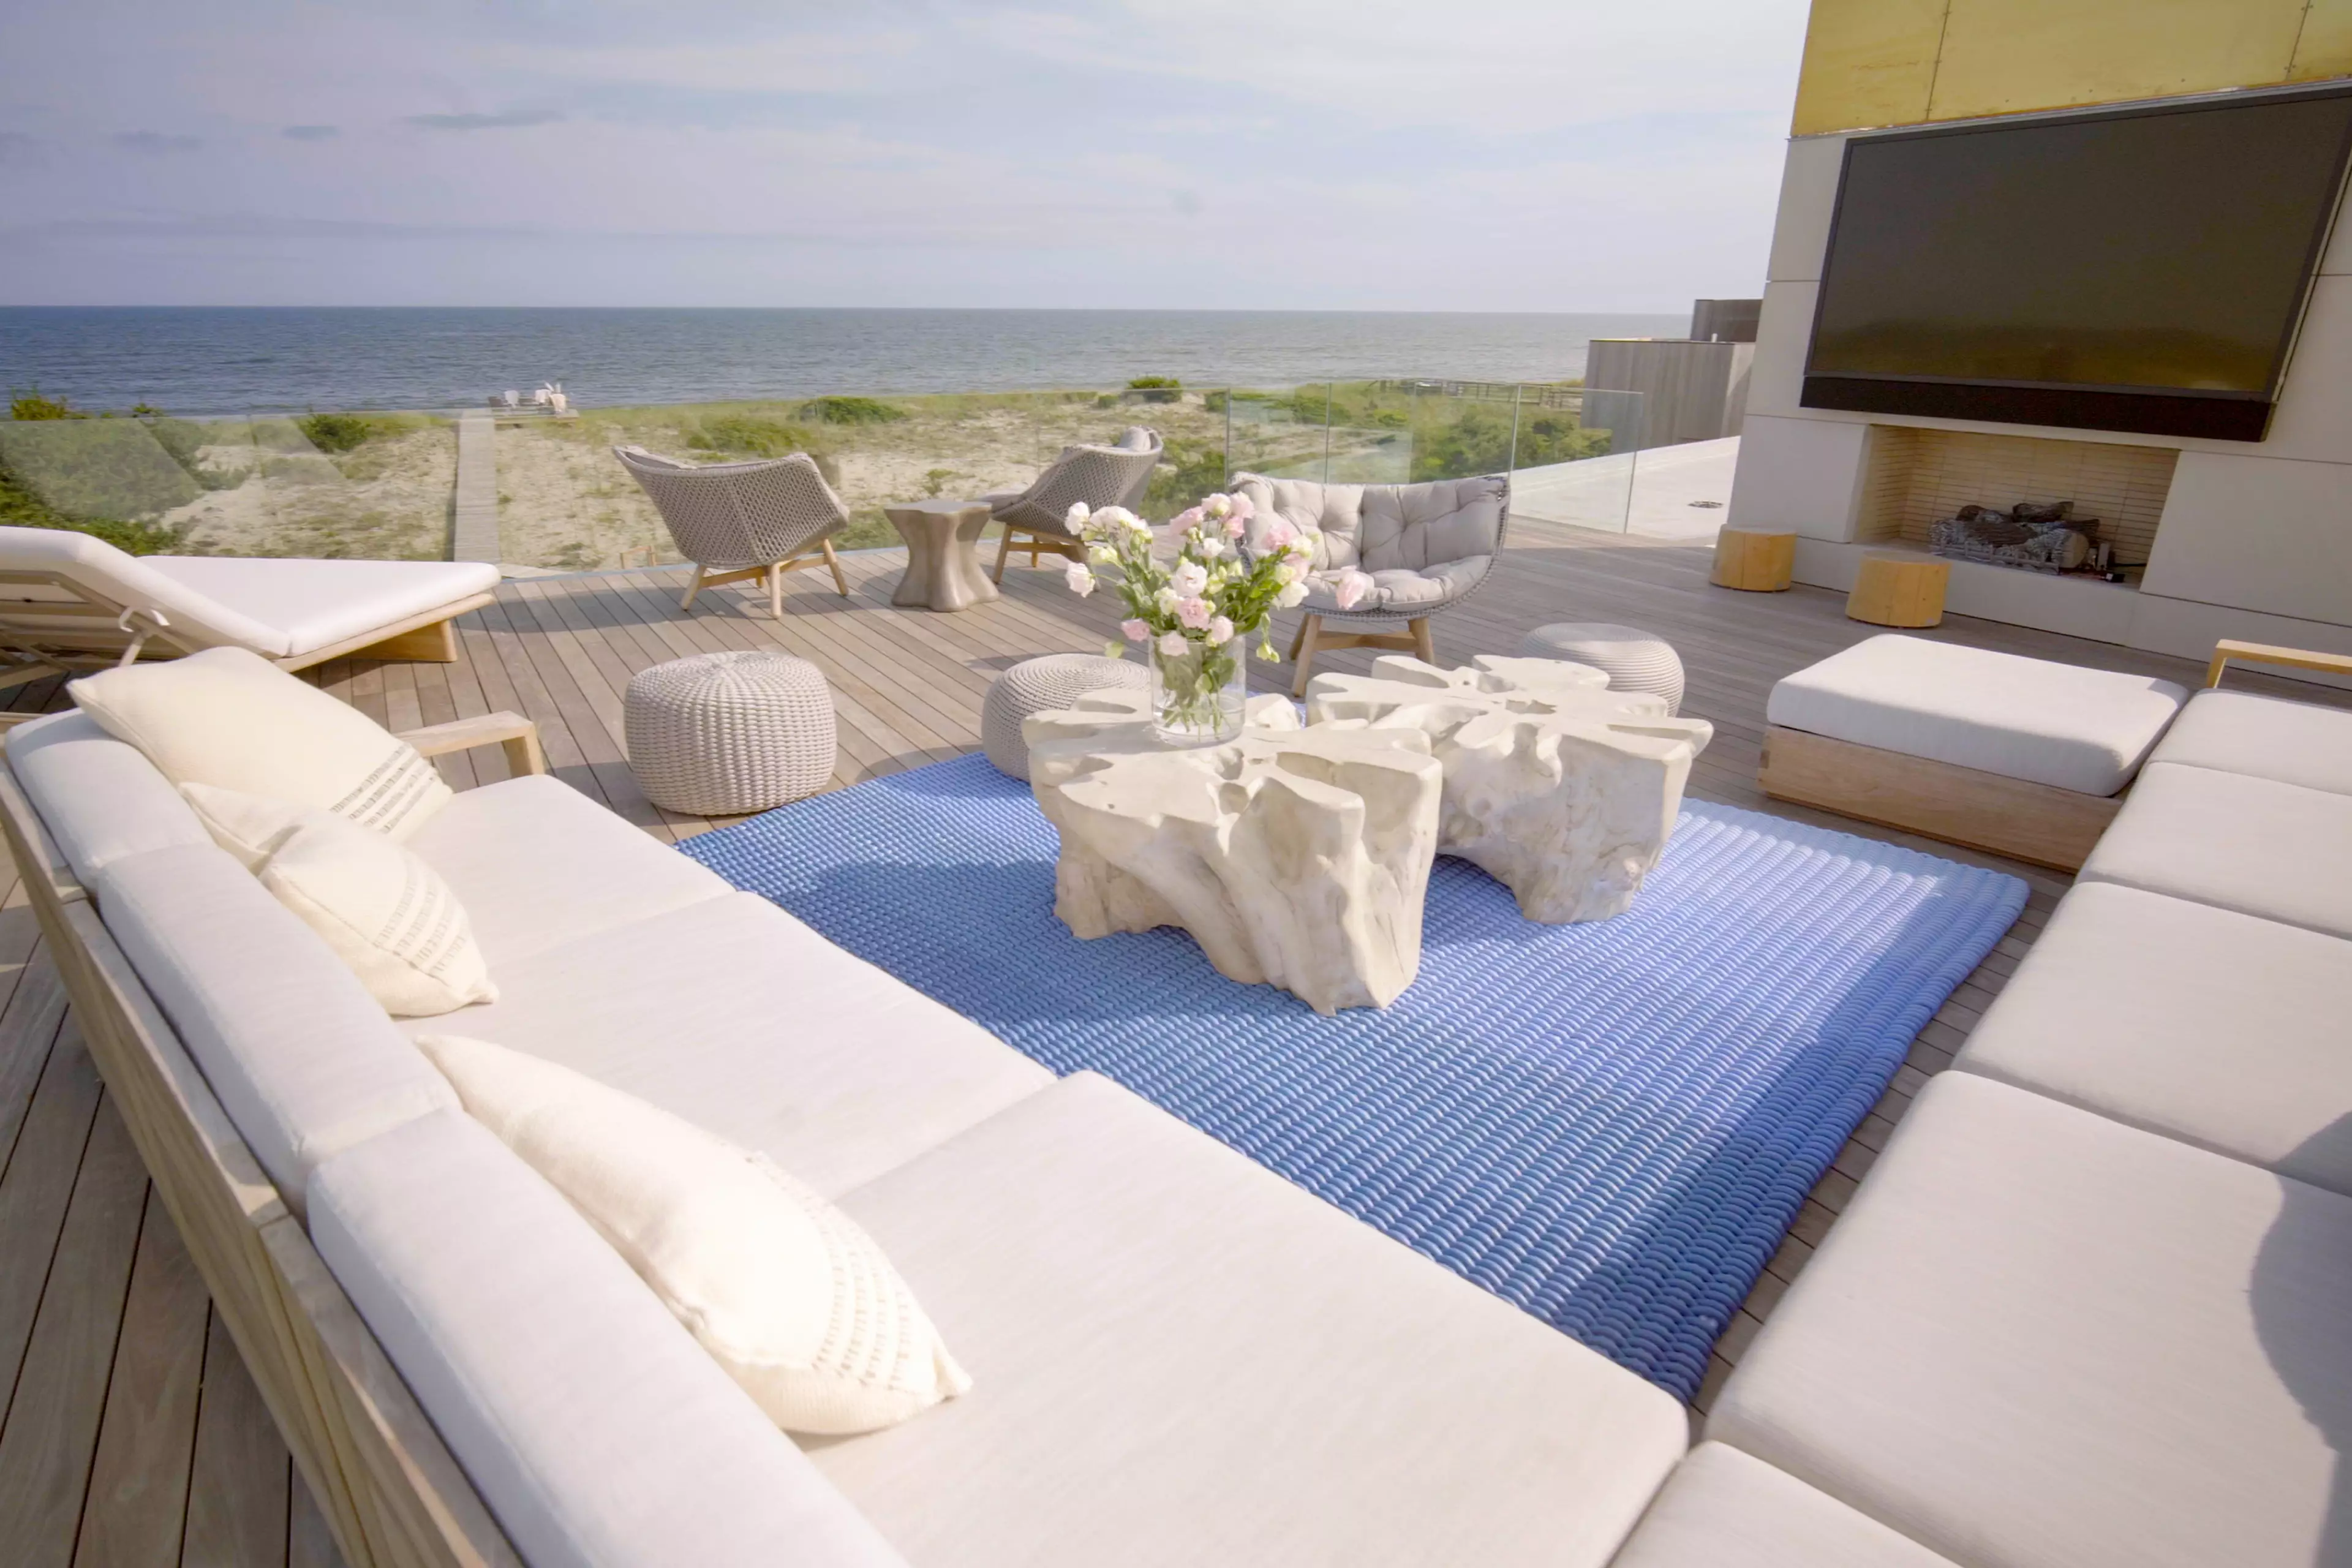 The series dives into the high stakes world of the Hamptons property market (